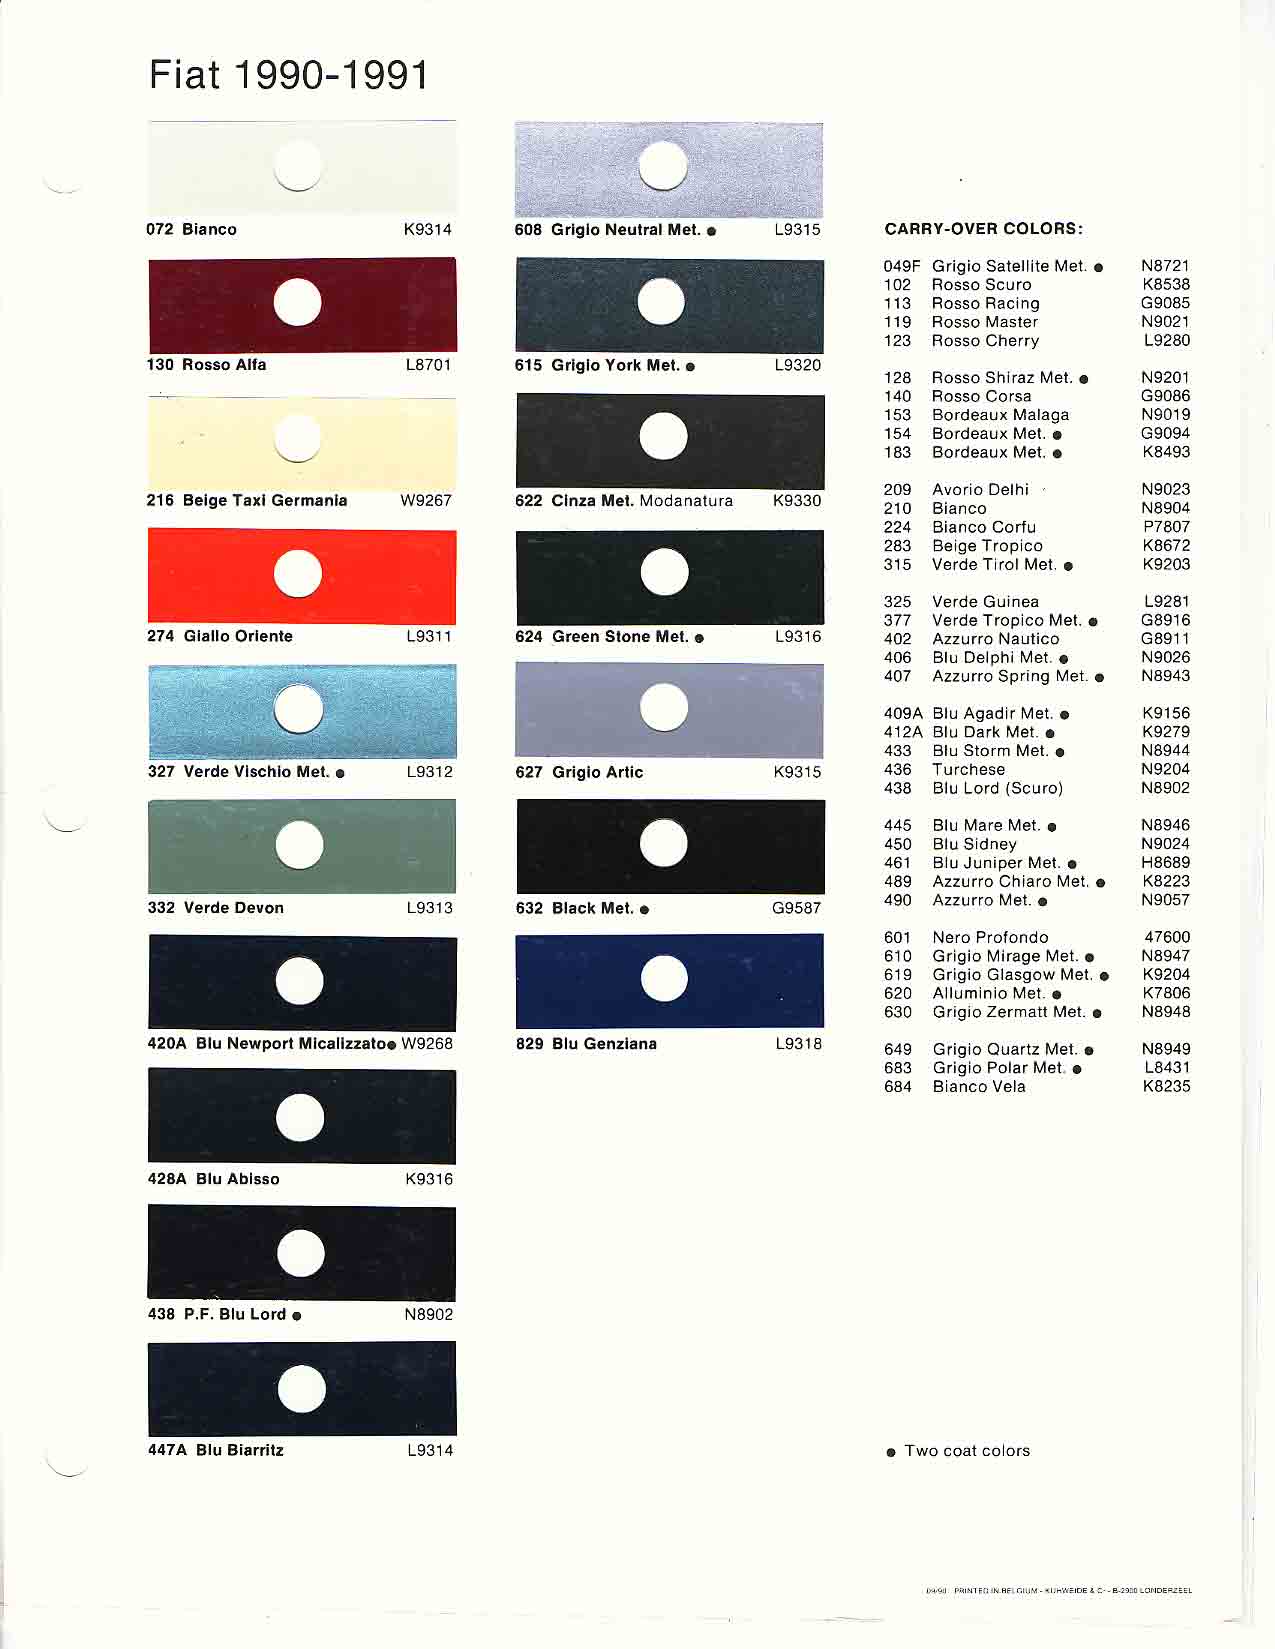 Oem paint codes and color examples for various models of  1990 & 1991 fiat vehicles 